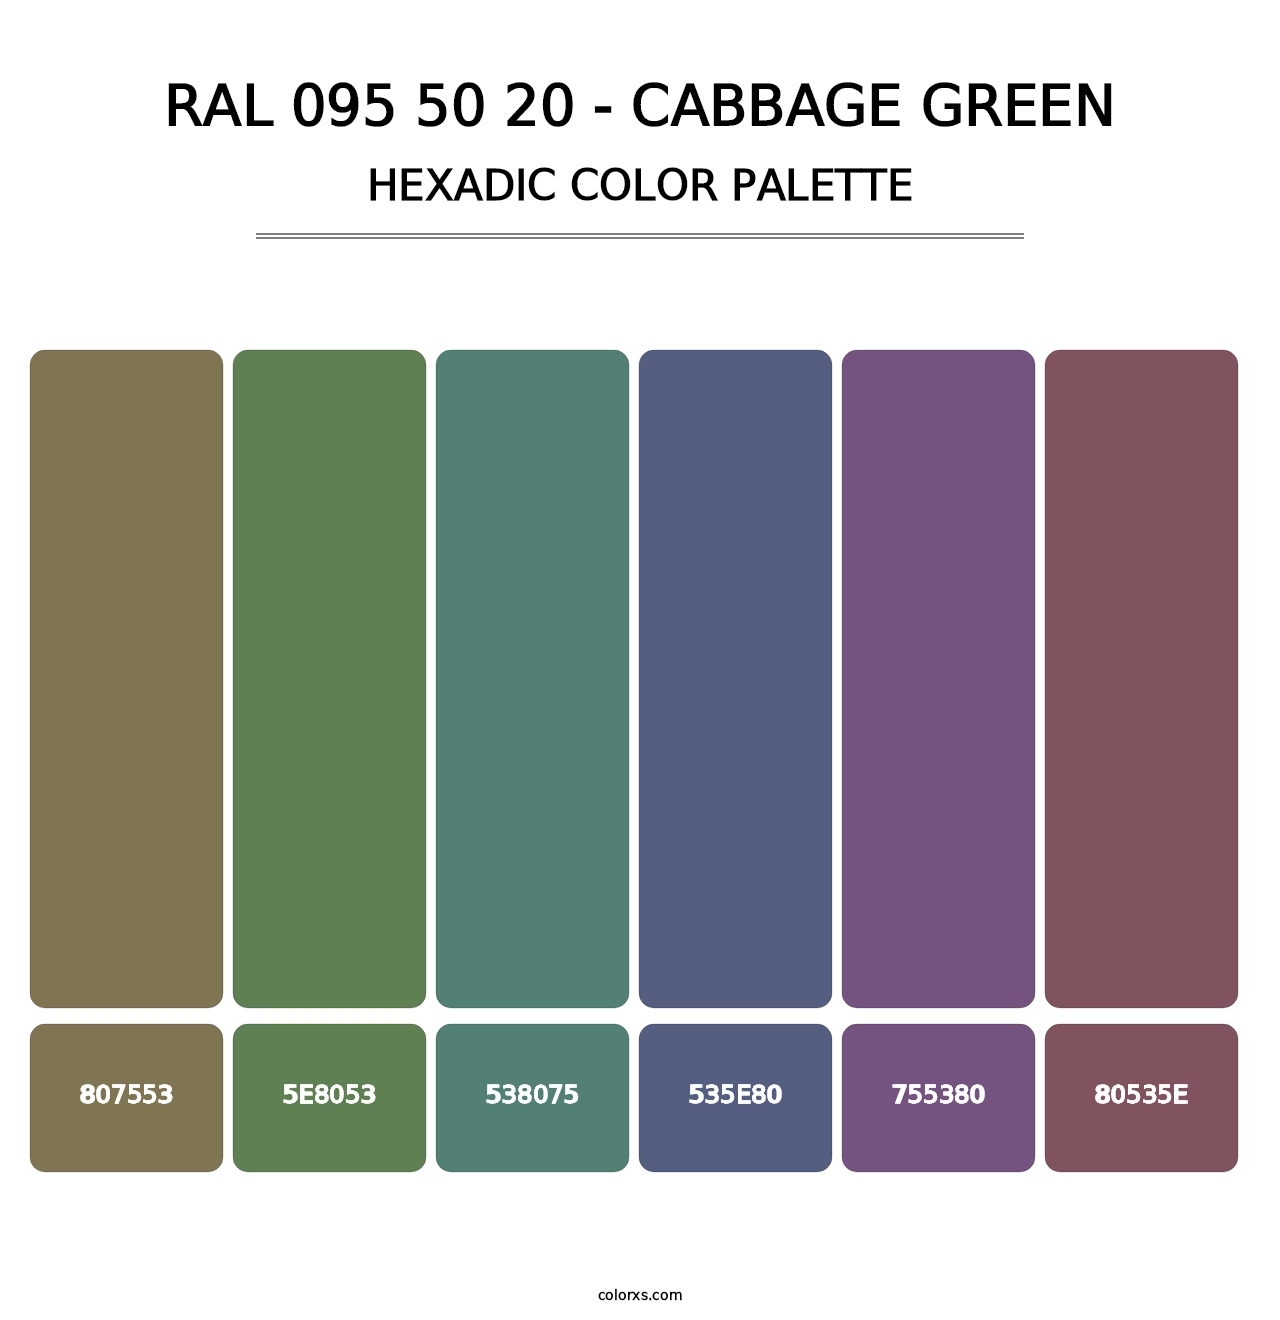 RAL 095 50 20 - Cabbage Green - Hexadic Color Palette